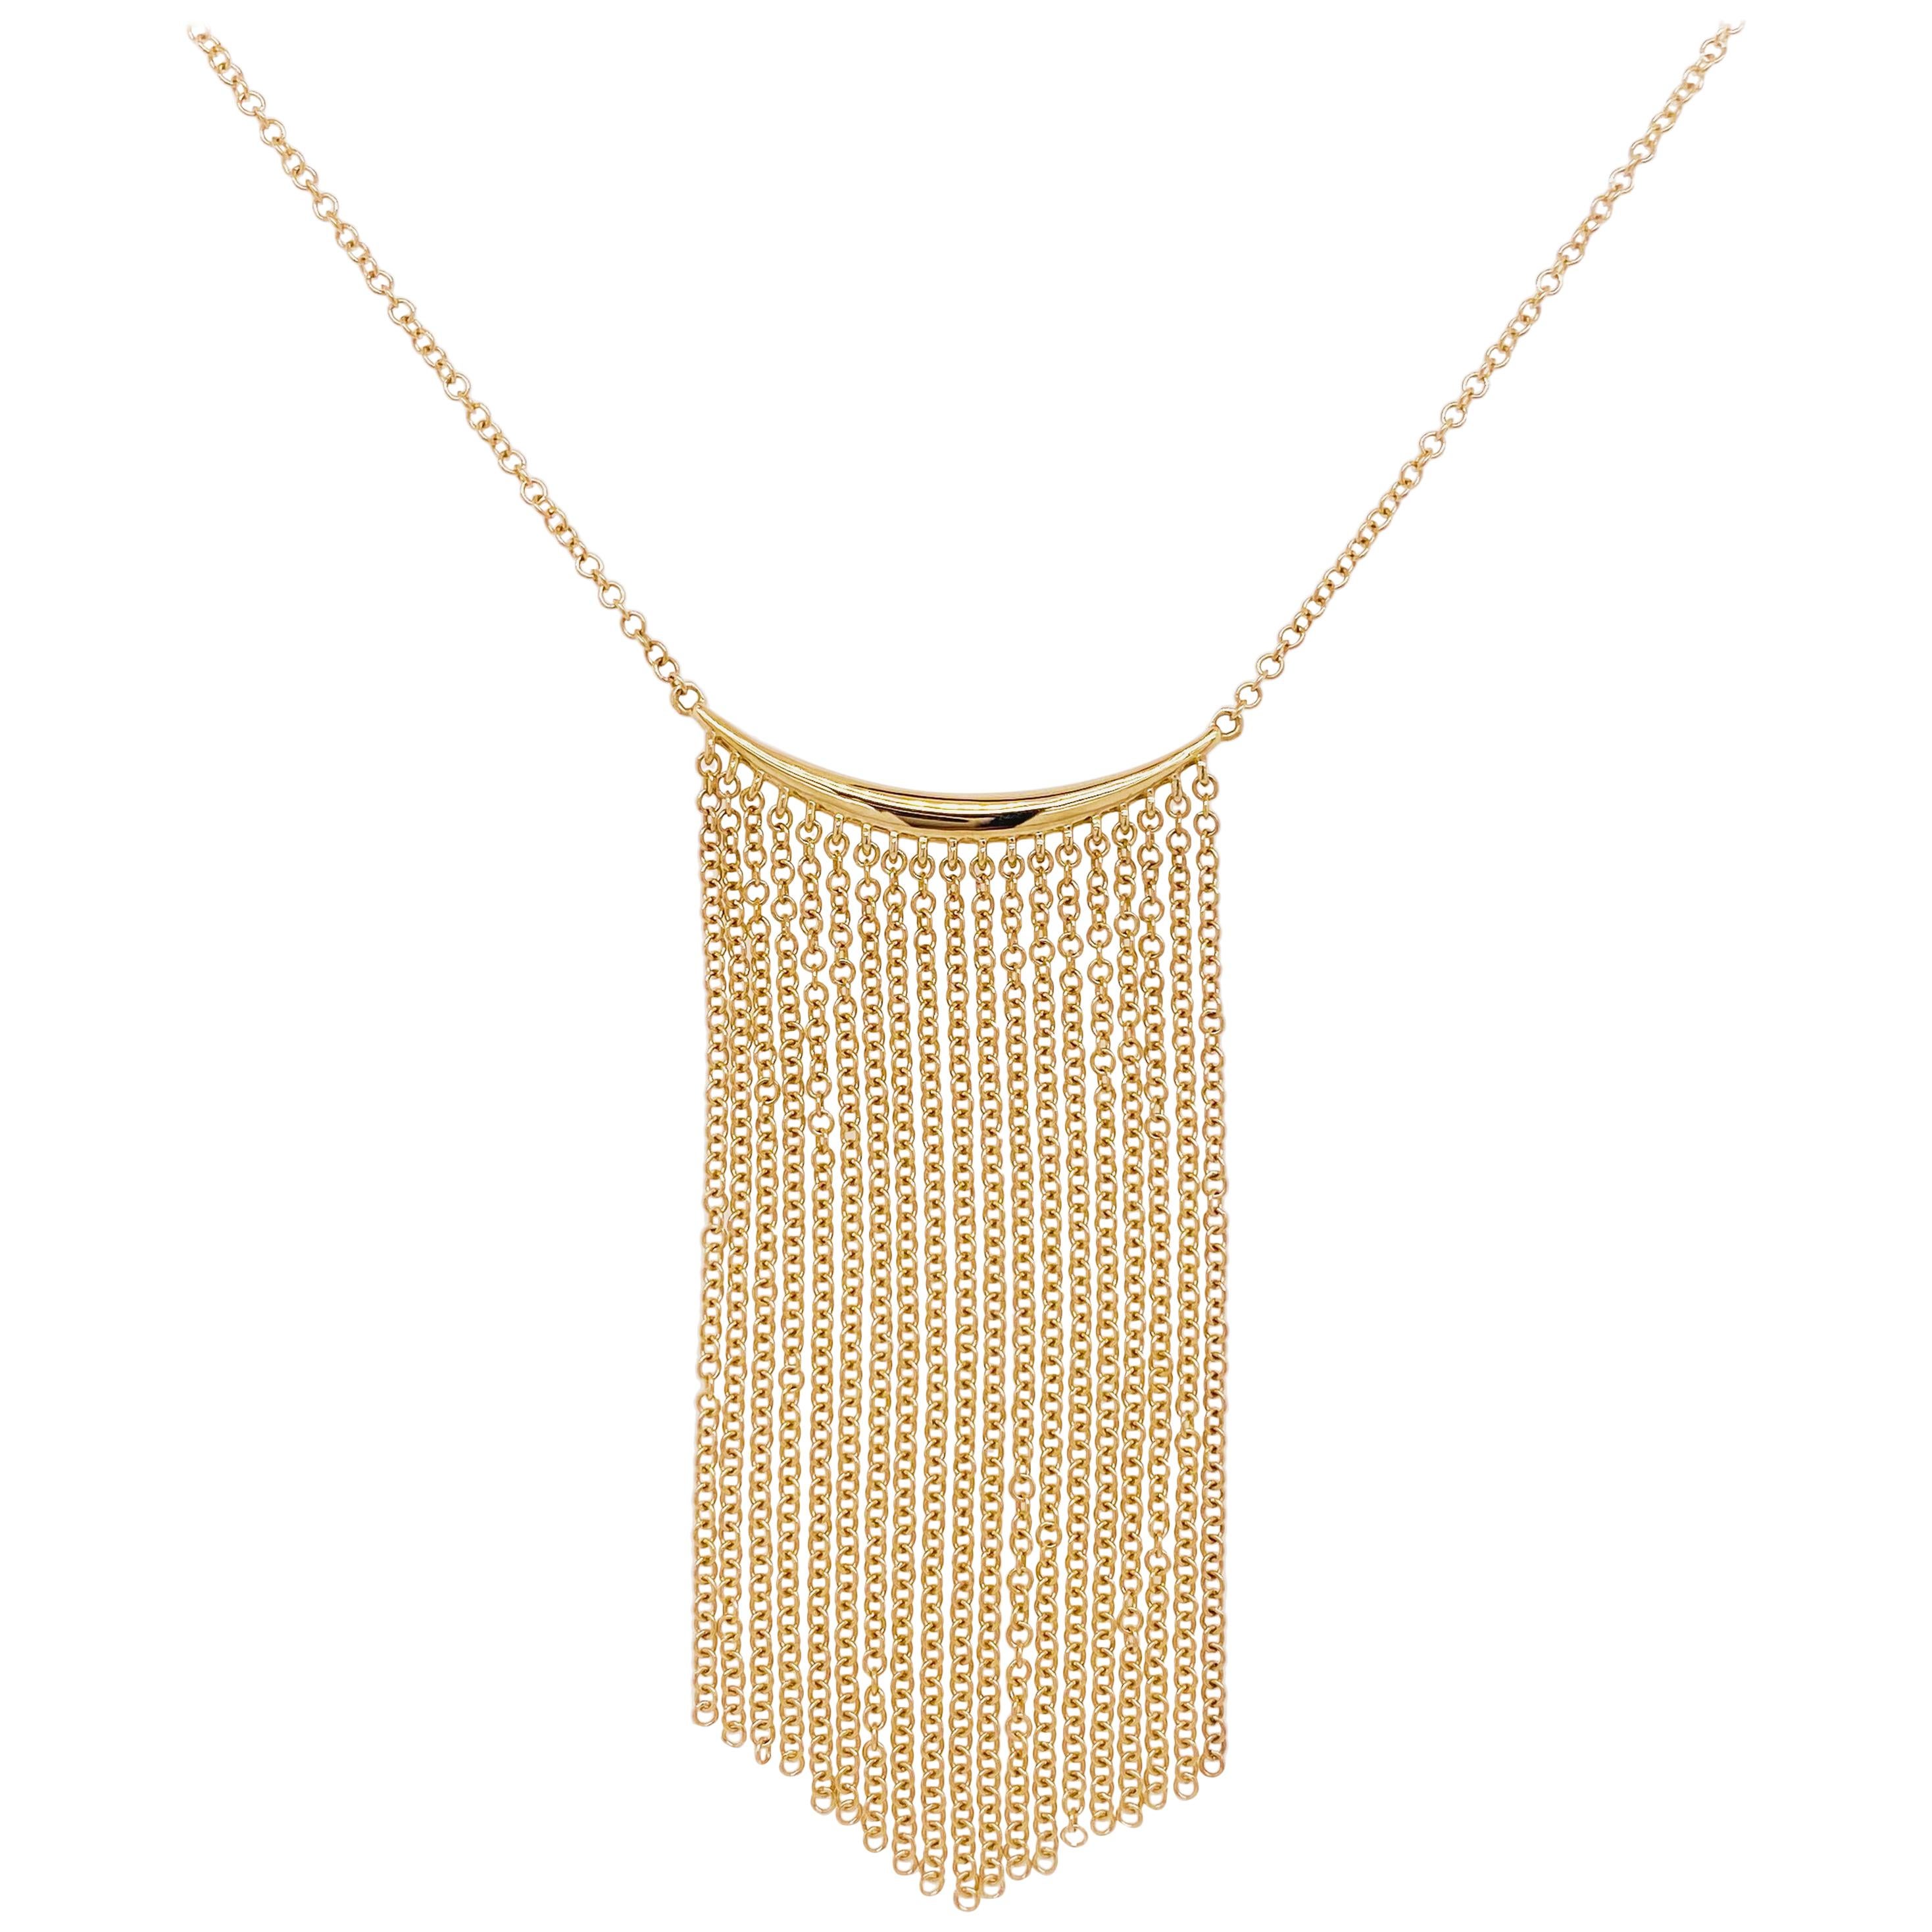 Waterfall Chain Necklace, 14 Karat Yellow Gold Curved Bar, NeckMess For Sale